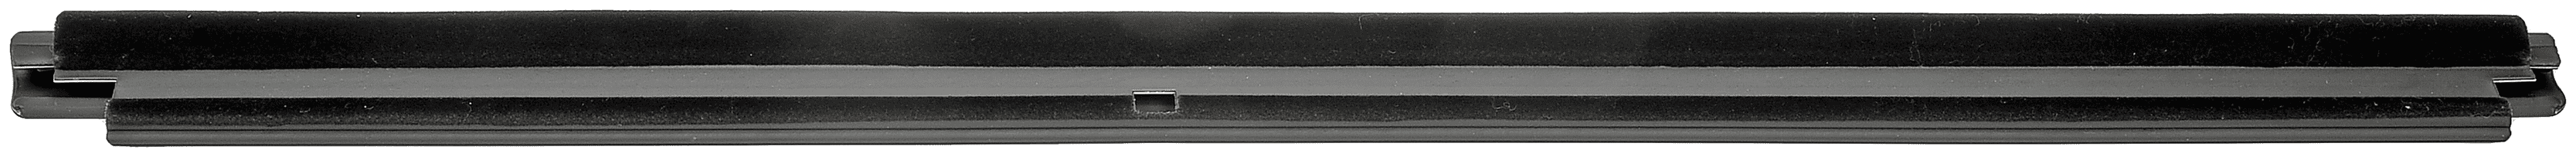 Dorman 25863 Rear Passenger Side Outer Door Window Seal for Select Cadillac/Chevrolet/GMC Models